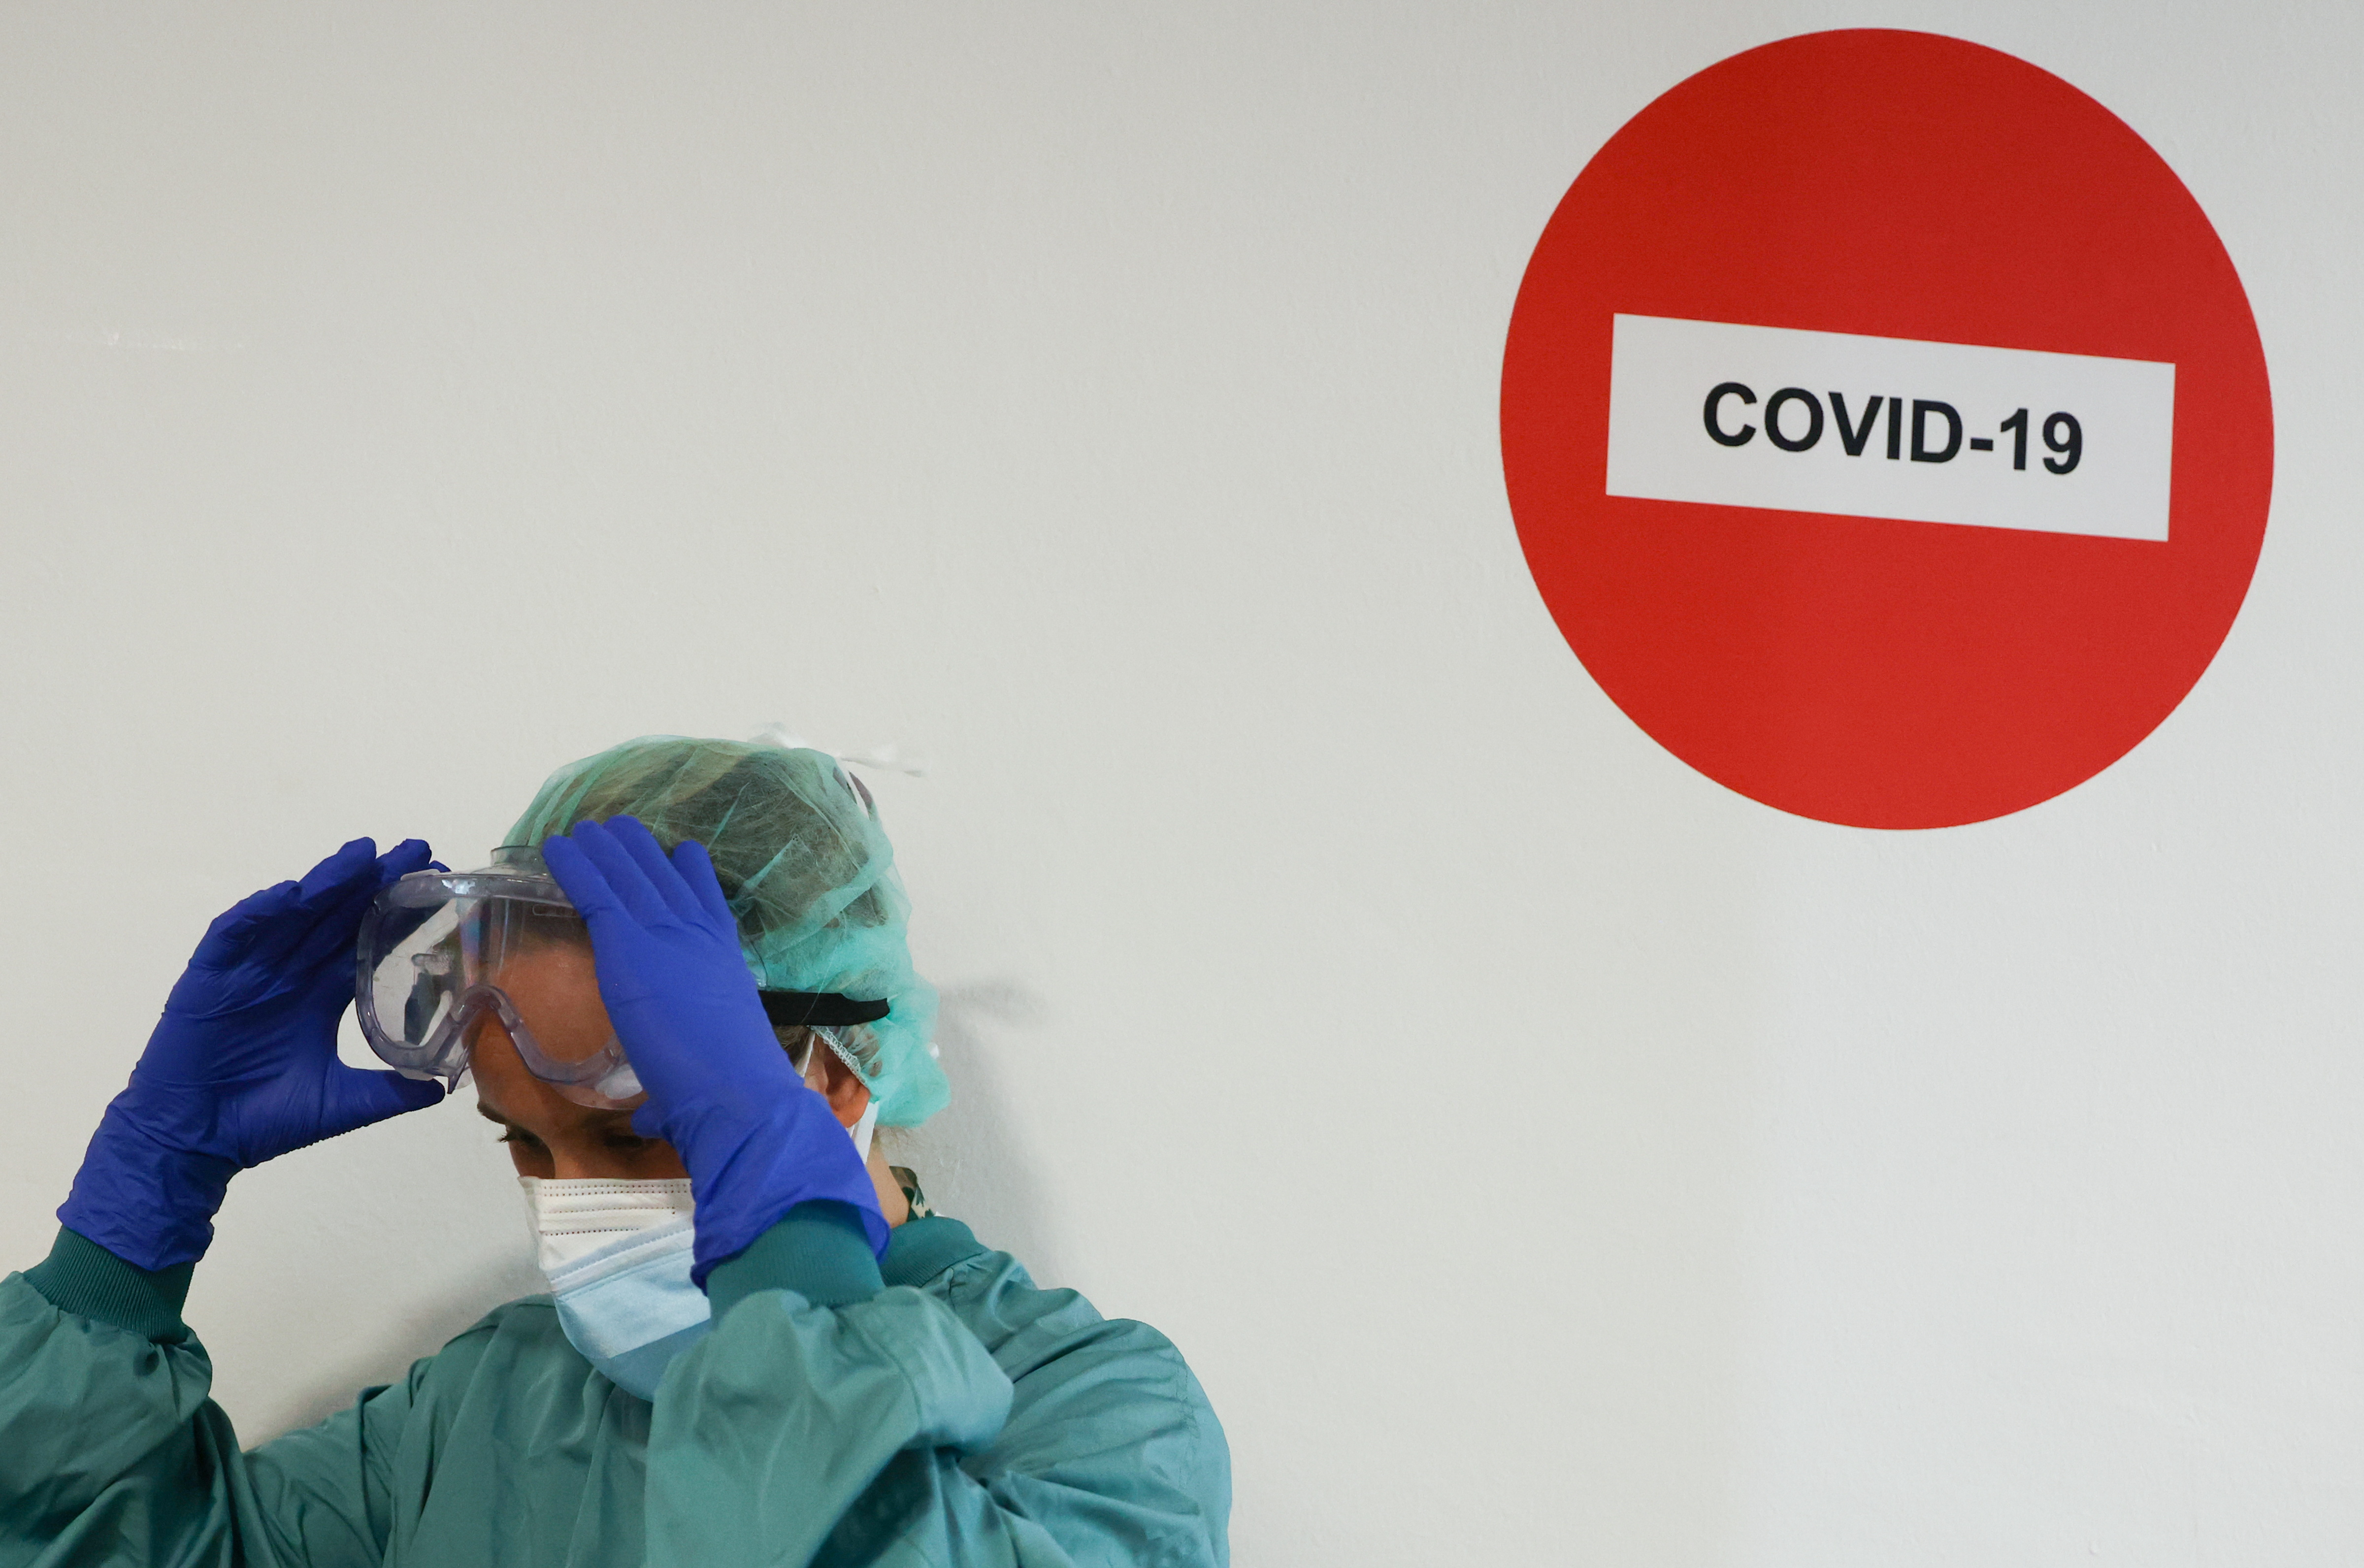 A hospital staff member adjusts protective glasses before treating a patient suffering from the coronavirus disease (COVID-19) at Hospital del Mar, where an additional ward has been opened to deal with an increase in coronavirus patients in Barcelona, Spain July 15, 2021.  REUTERS/Nacho Doce